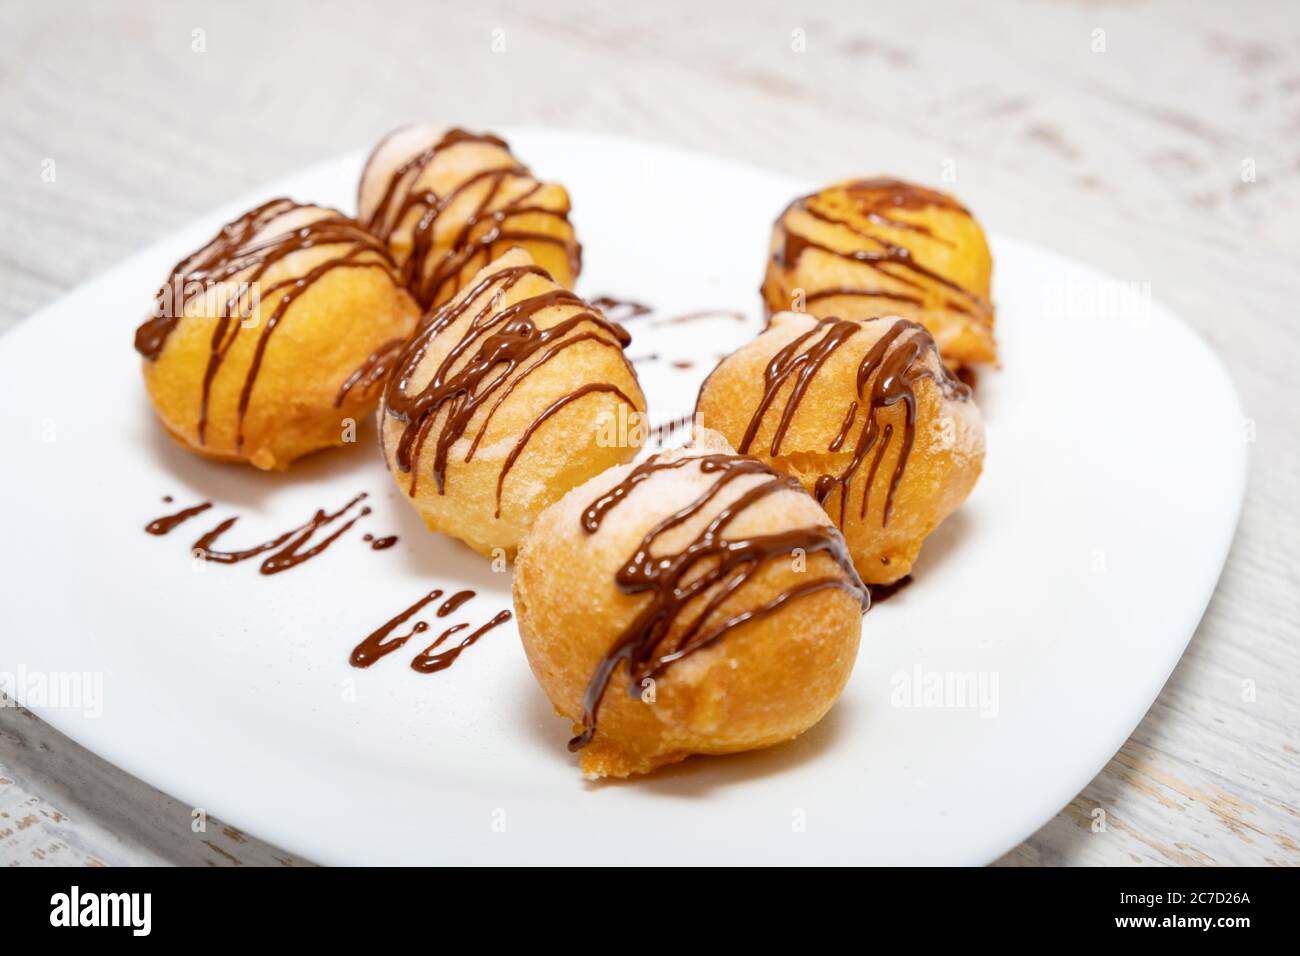 Small dessert donuts with chocolate frosting Stock Photo